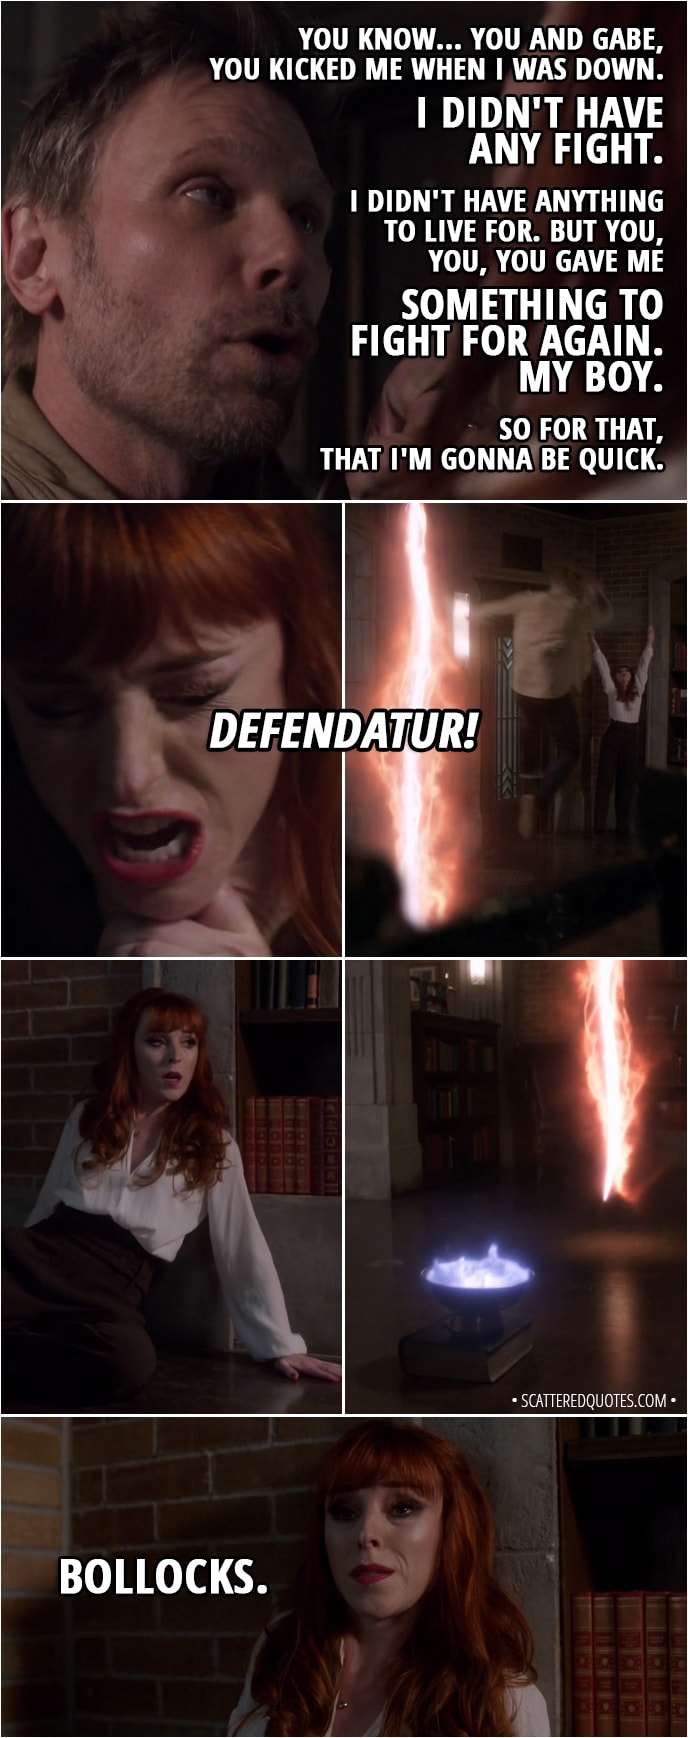 Quote from Supernatural 13x21 - Lucifer: You know... you and Gabe, you kicked me when I was down. I didn't have any fight. I didn't have anything to live for. But you, you, you gave me something to fight for again. My boy. So for that, that I'm gonna be quick. Rowena: Defendatur! (the spell throws Lucifer backwards right through the rift) Bollocks.